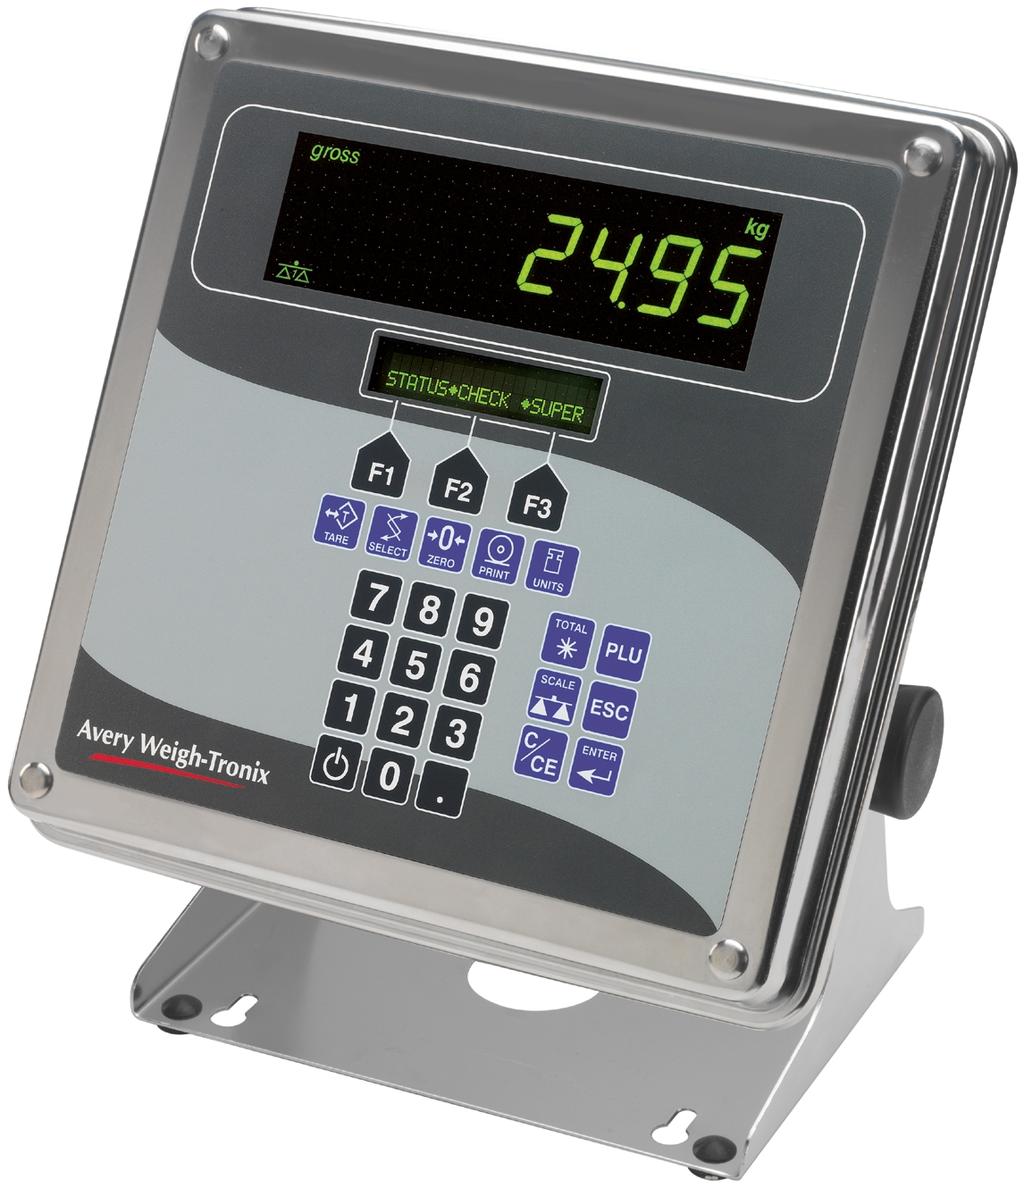 Avery Weigh-Tronix Technical Specification multi-function weight indicator Description General This specification describes the advanced multi-function weight indicator, capable of stand-alone